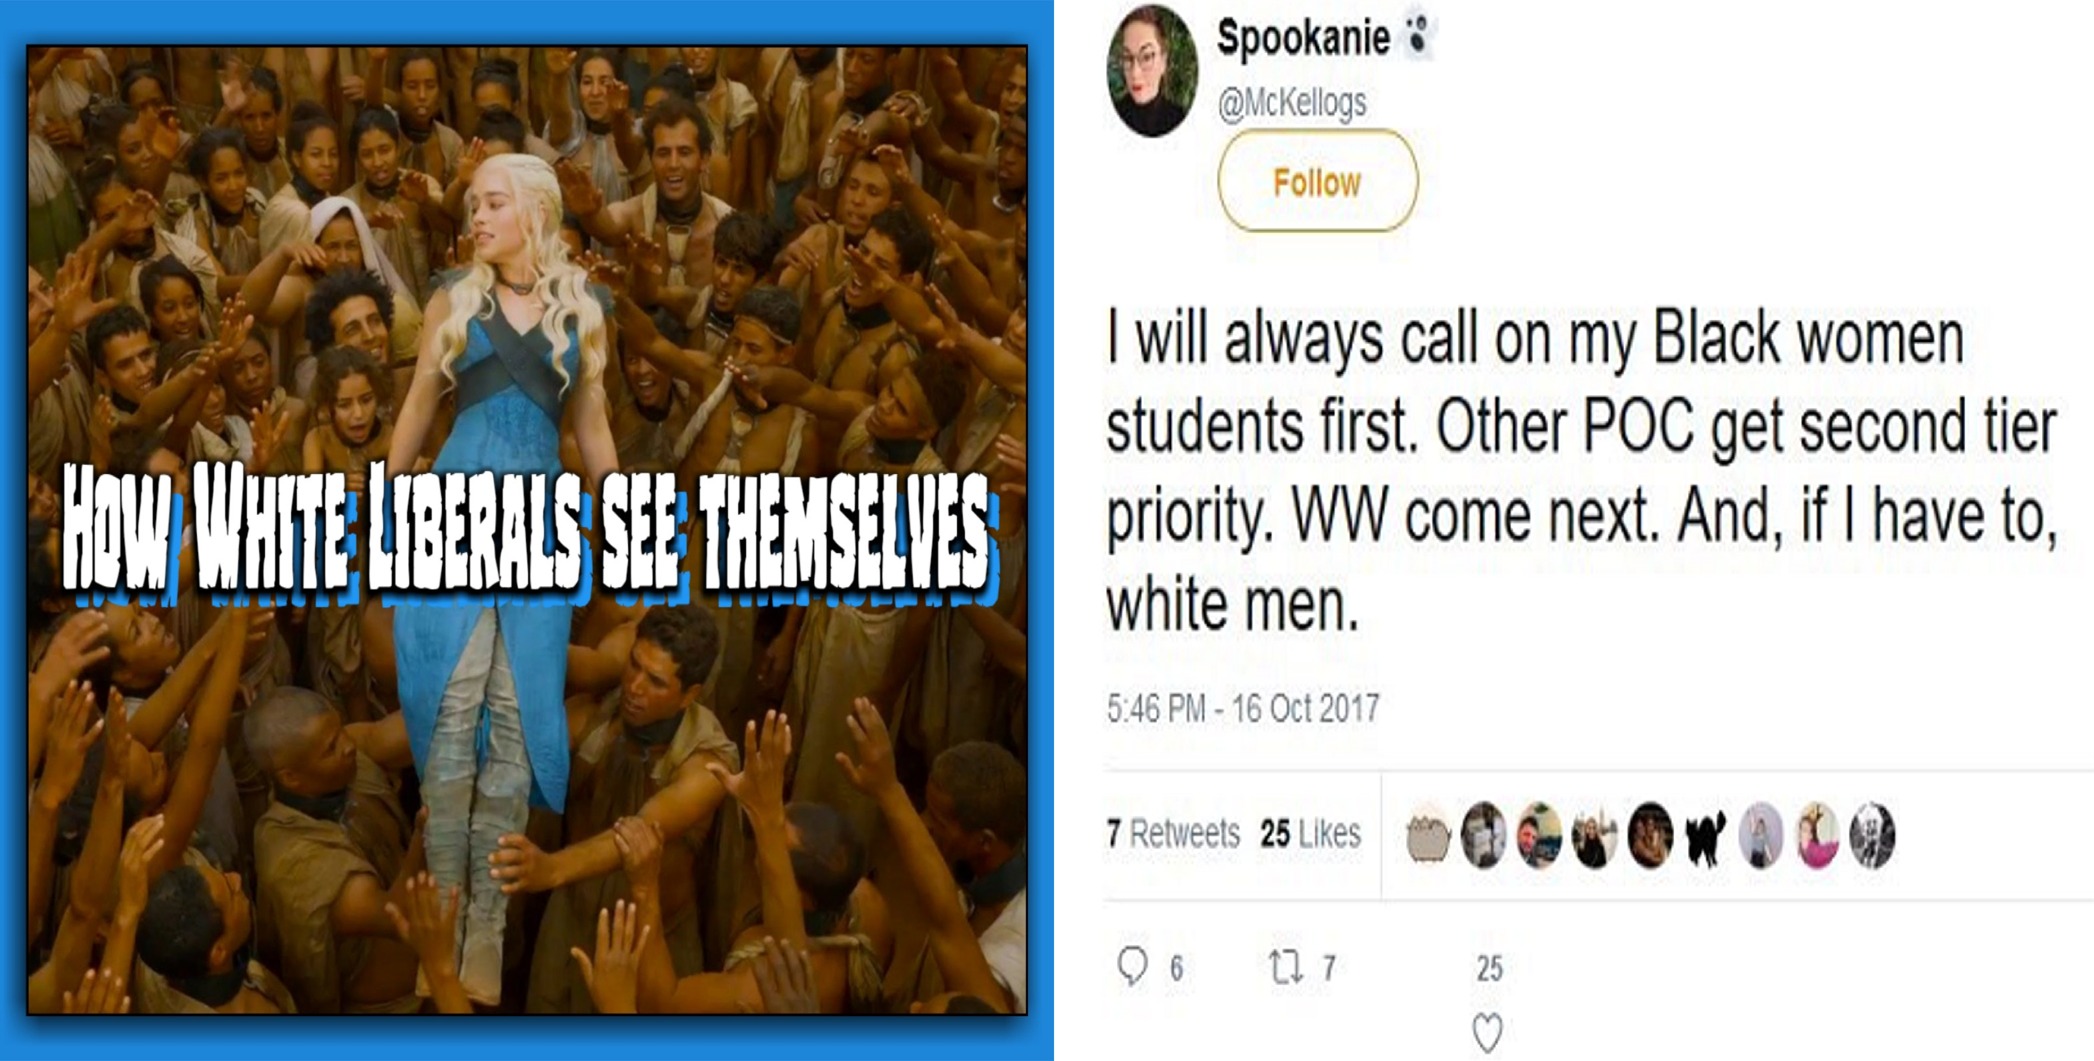 memes - human - Spookanie 3 How White Liberals Se Themselves I will always call on my Black women students first. Other Poc get second tier priority. Ww come next. And, if I have to, white men. 7 25 O Ow O 26 277 25